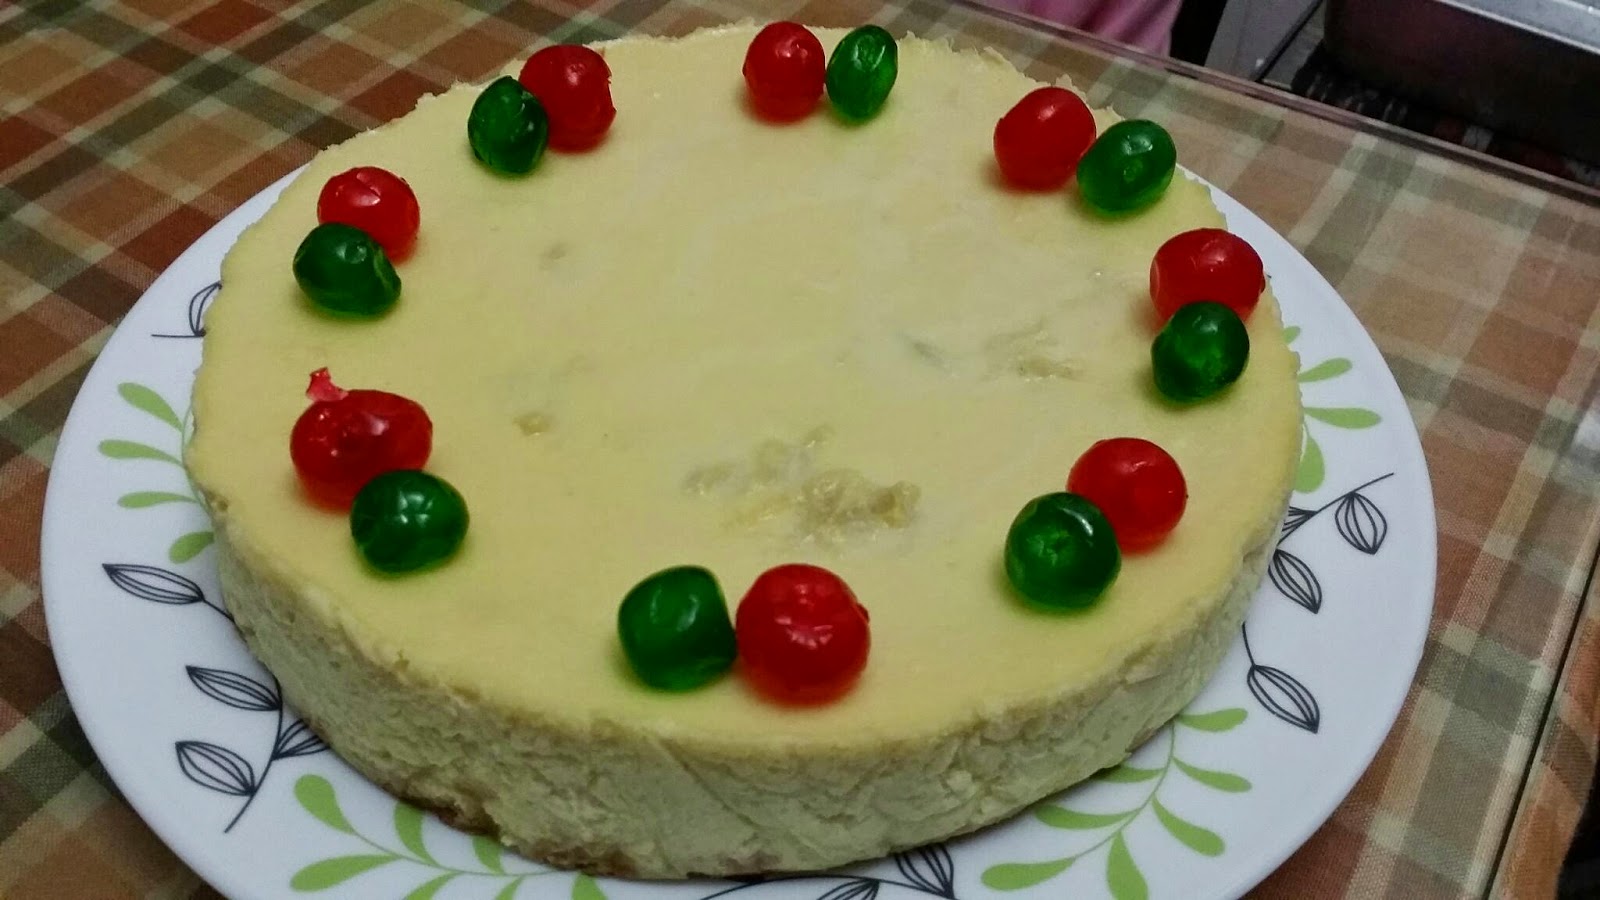 ZULFAZA LOVES COOKING: Classic durian cheesecake